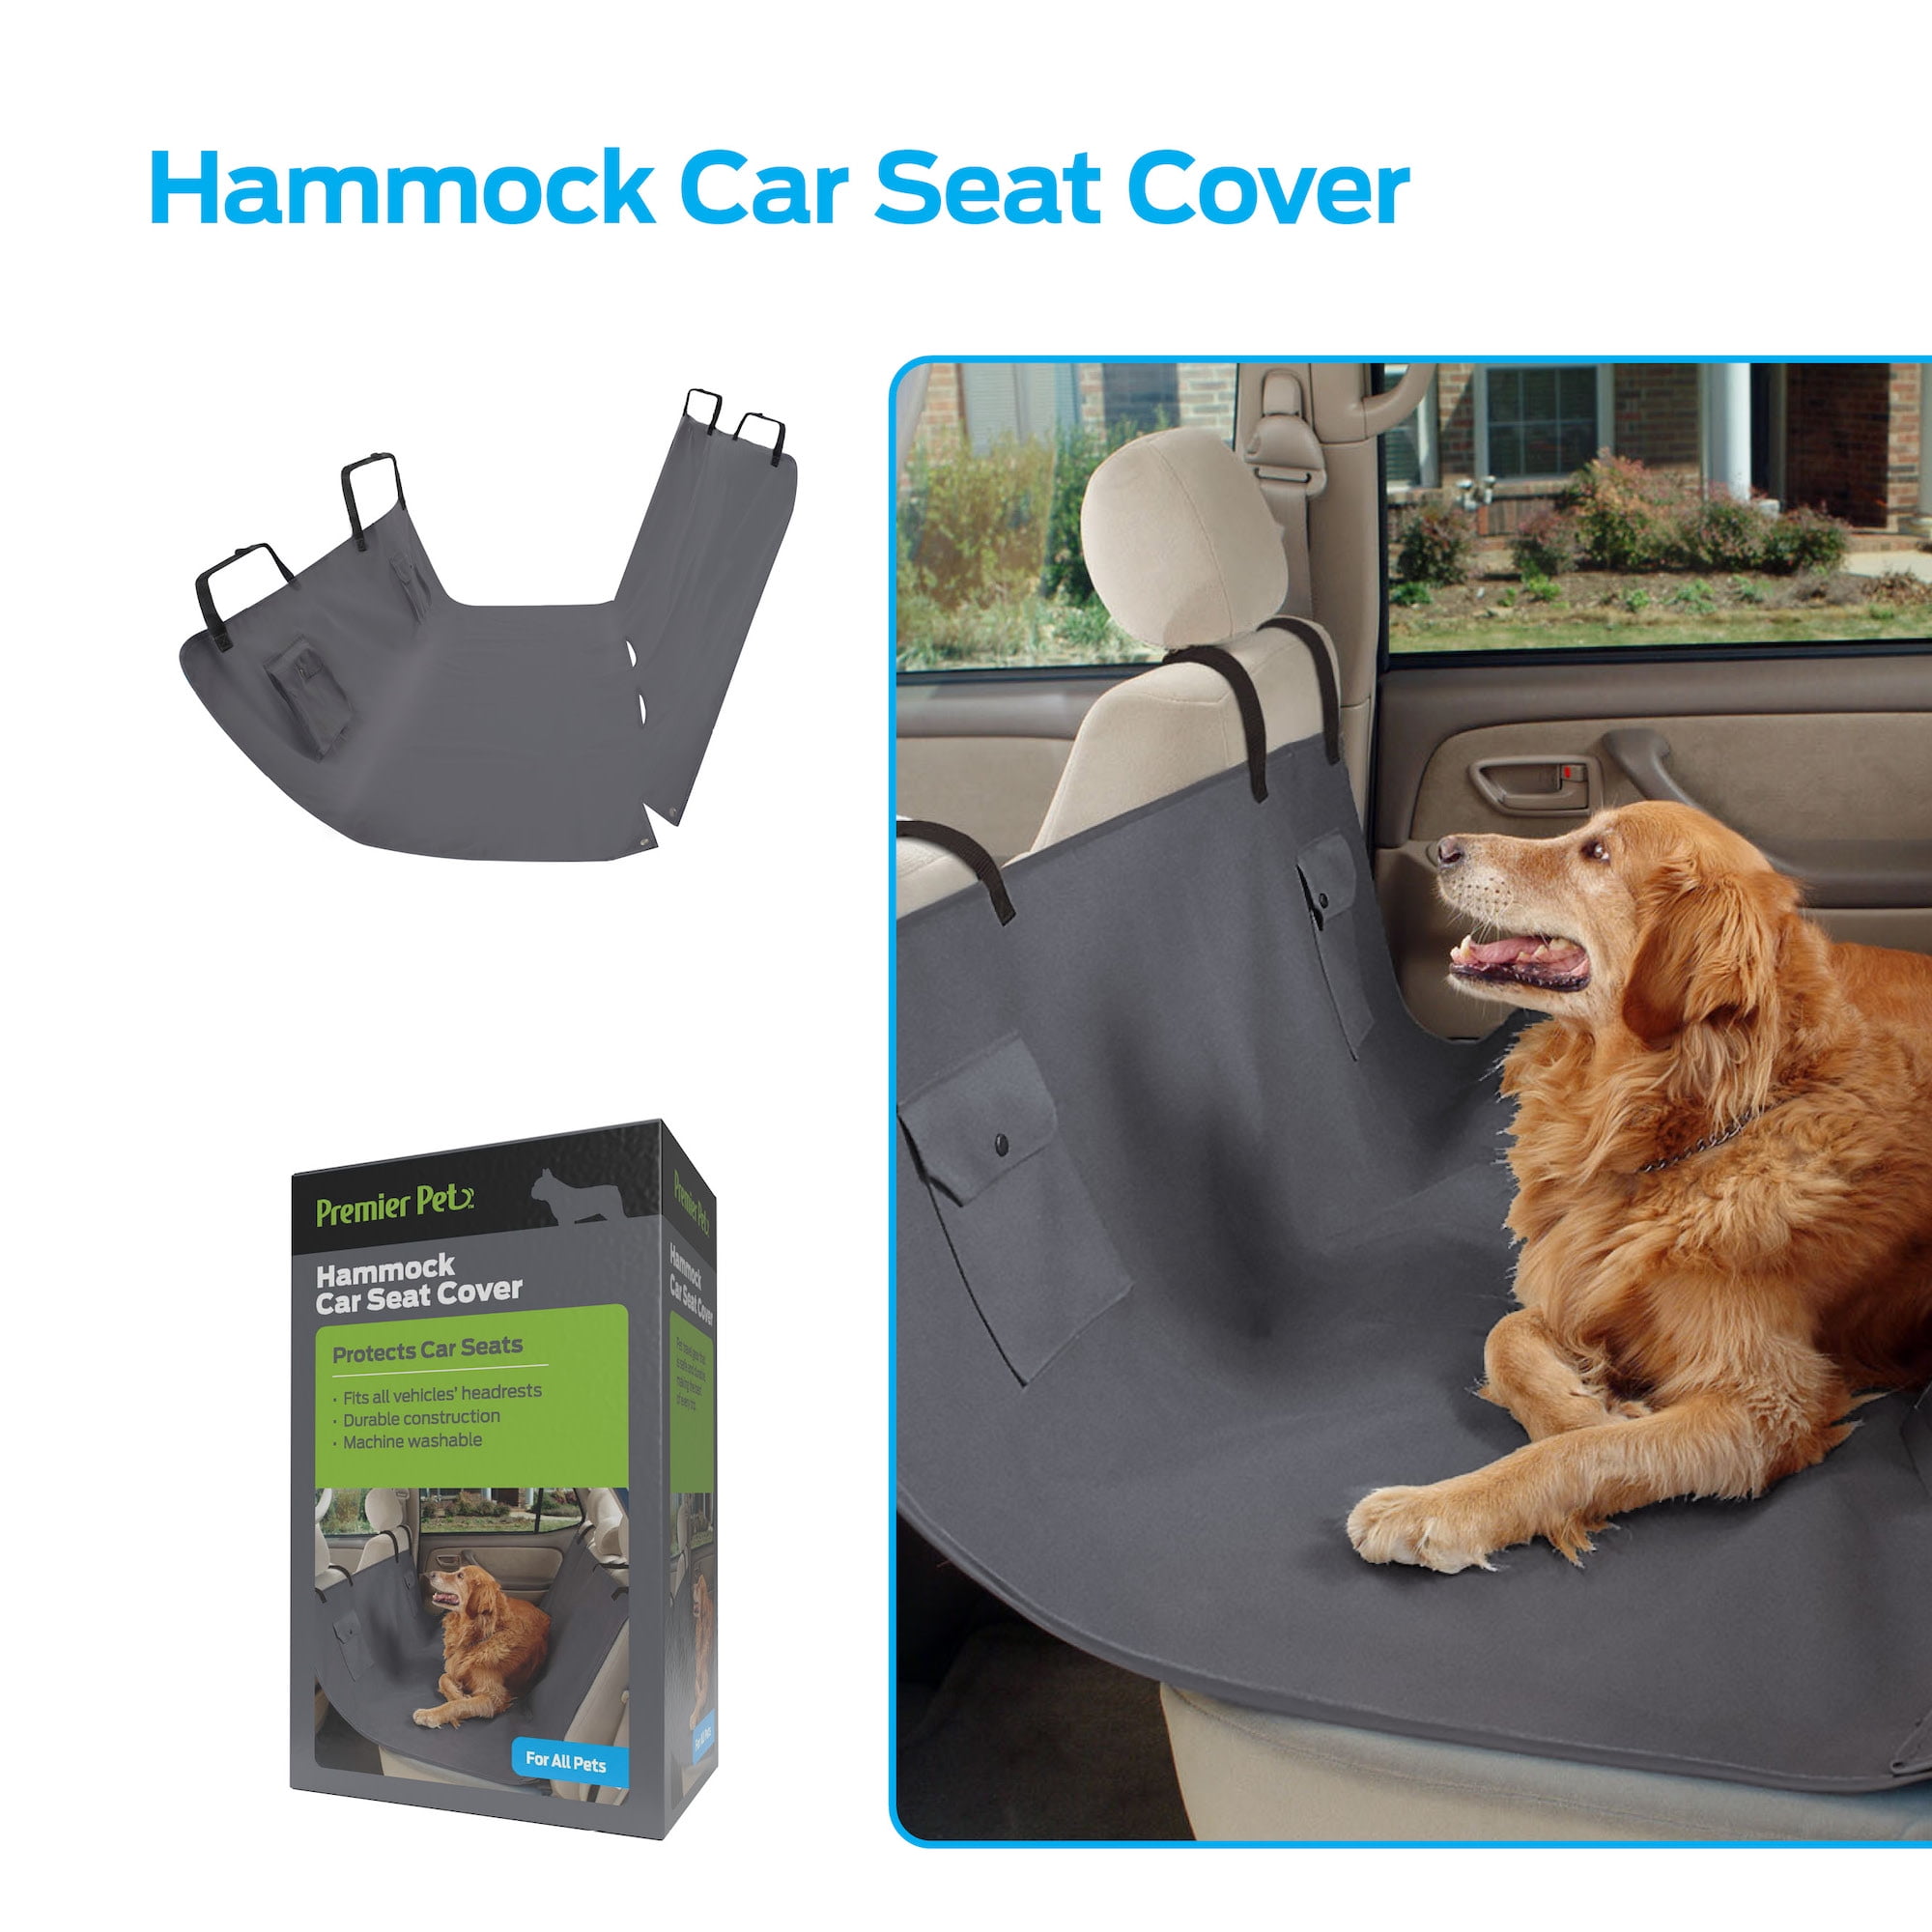 Premier Pet Car Hammock Seat Cover Helps Secure Your Dog And Protect Vehicle S Back Durable Machine Washable Design Makes Clean Up Easy Com - Dog Cover Seats For Cars